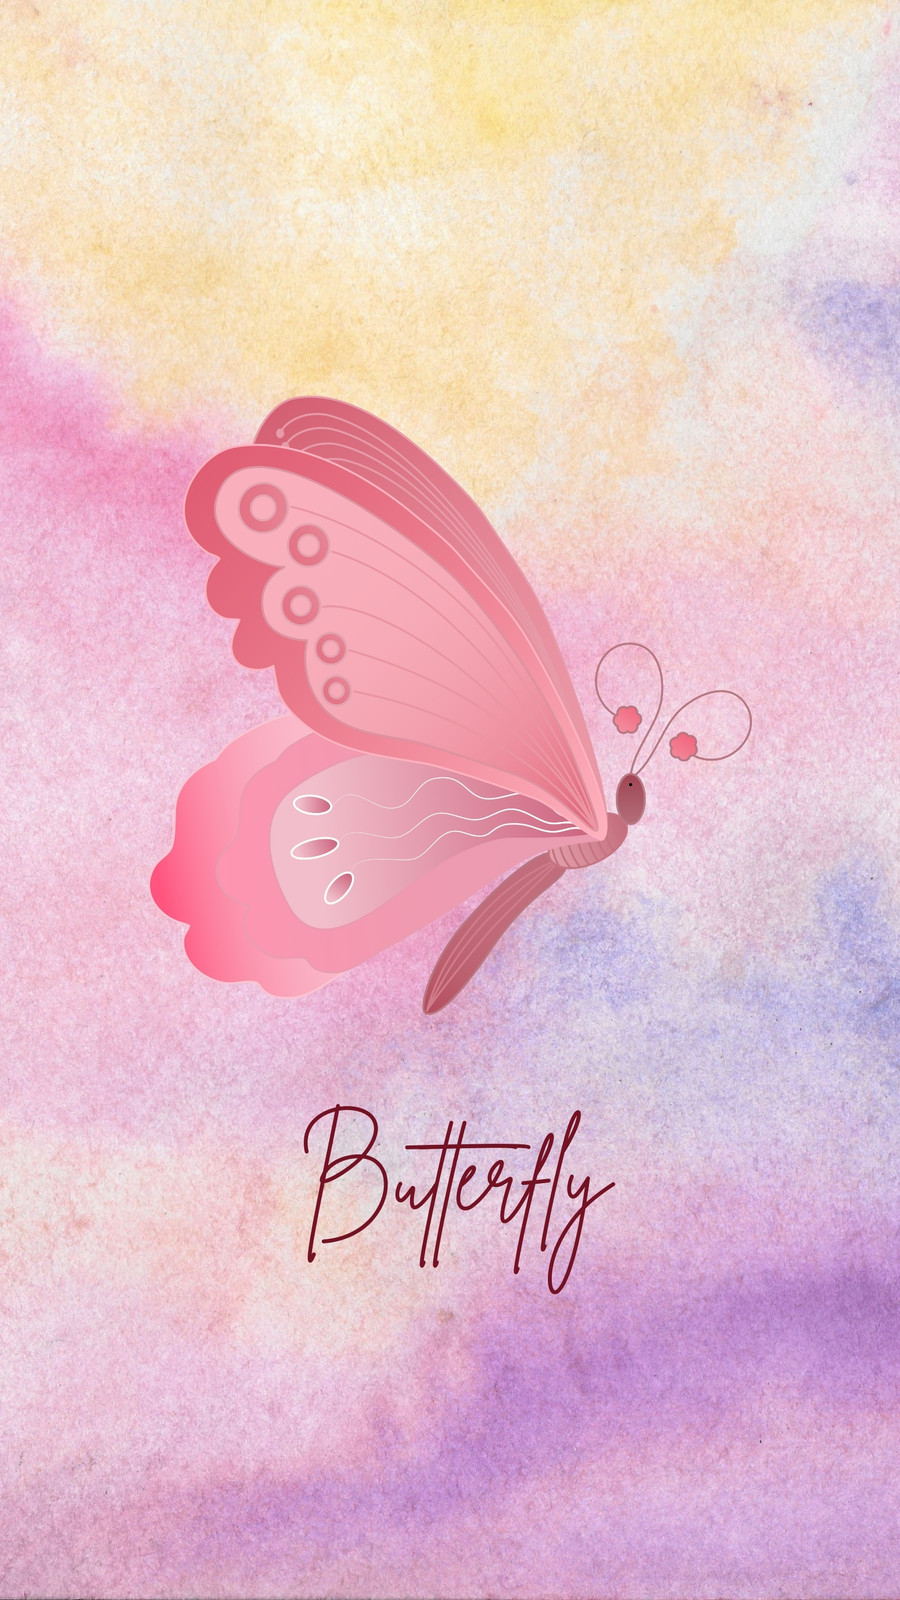 Free and customizable butterfly templates